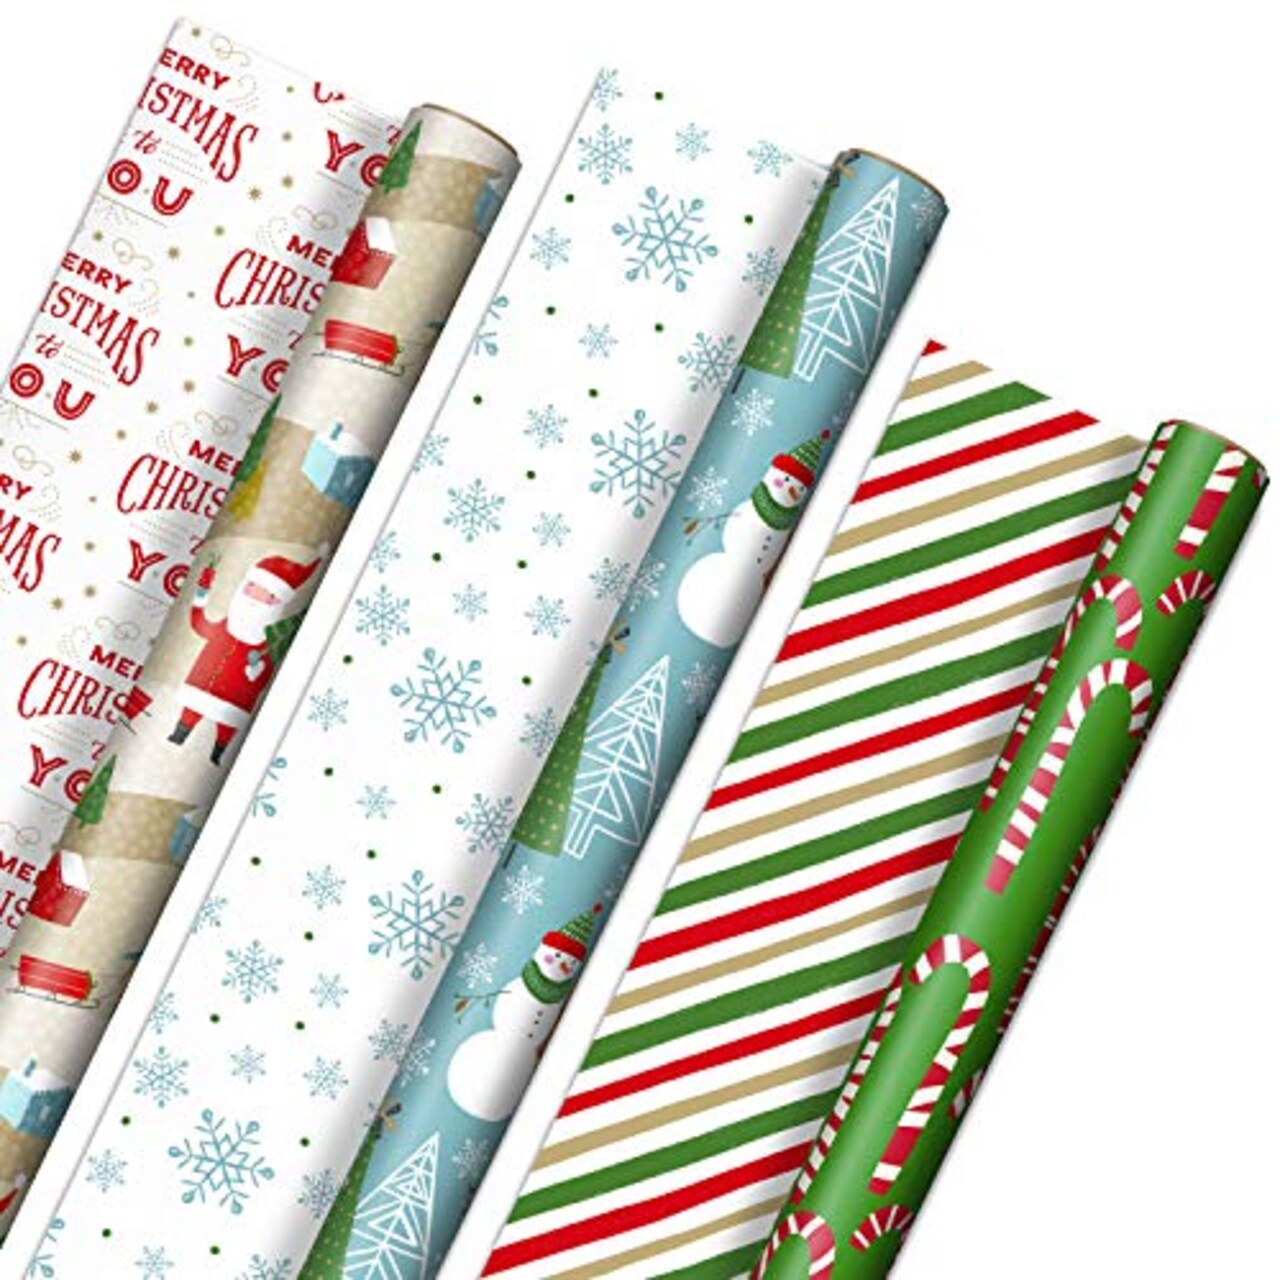 Hallmark Reversible Christmas Wrapping Paper (3 Rolls: 120 sq. ft. ttl)  Rustic Santa, Papercraft Snowmen, Candy Canes, Stripes, Snowflakes, Merry  Christmas to You